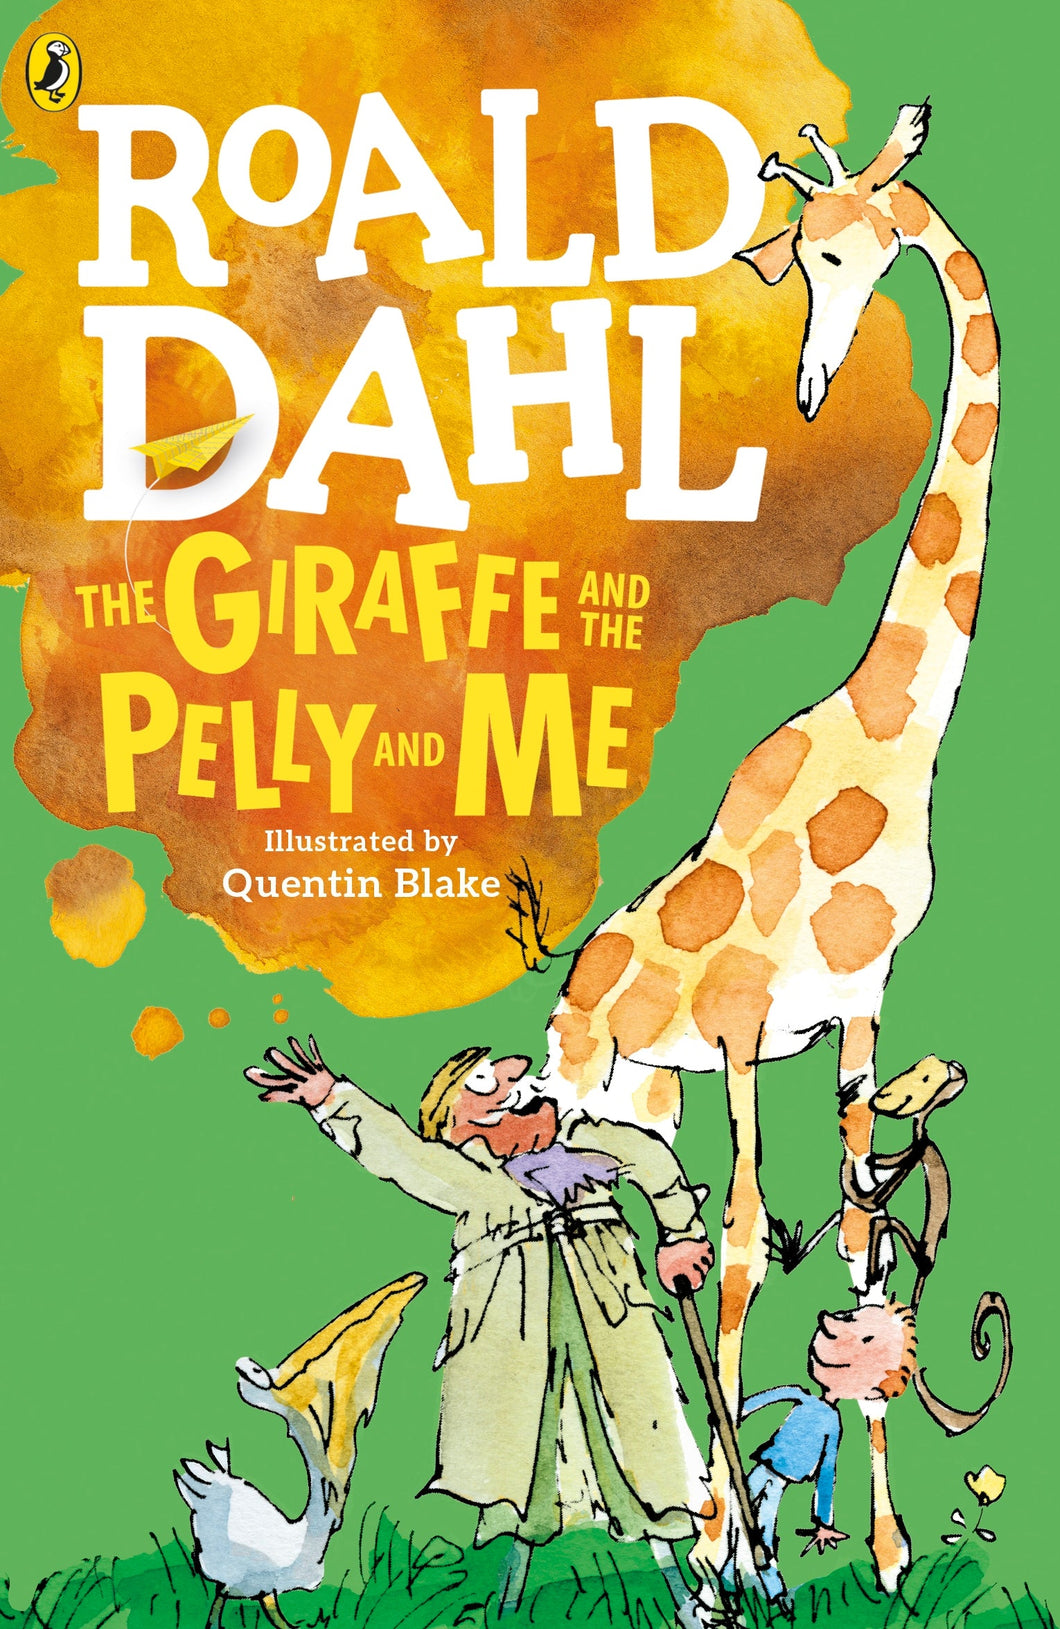 Giraffe and the Pelly and Me - Roald Dahl